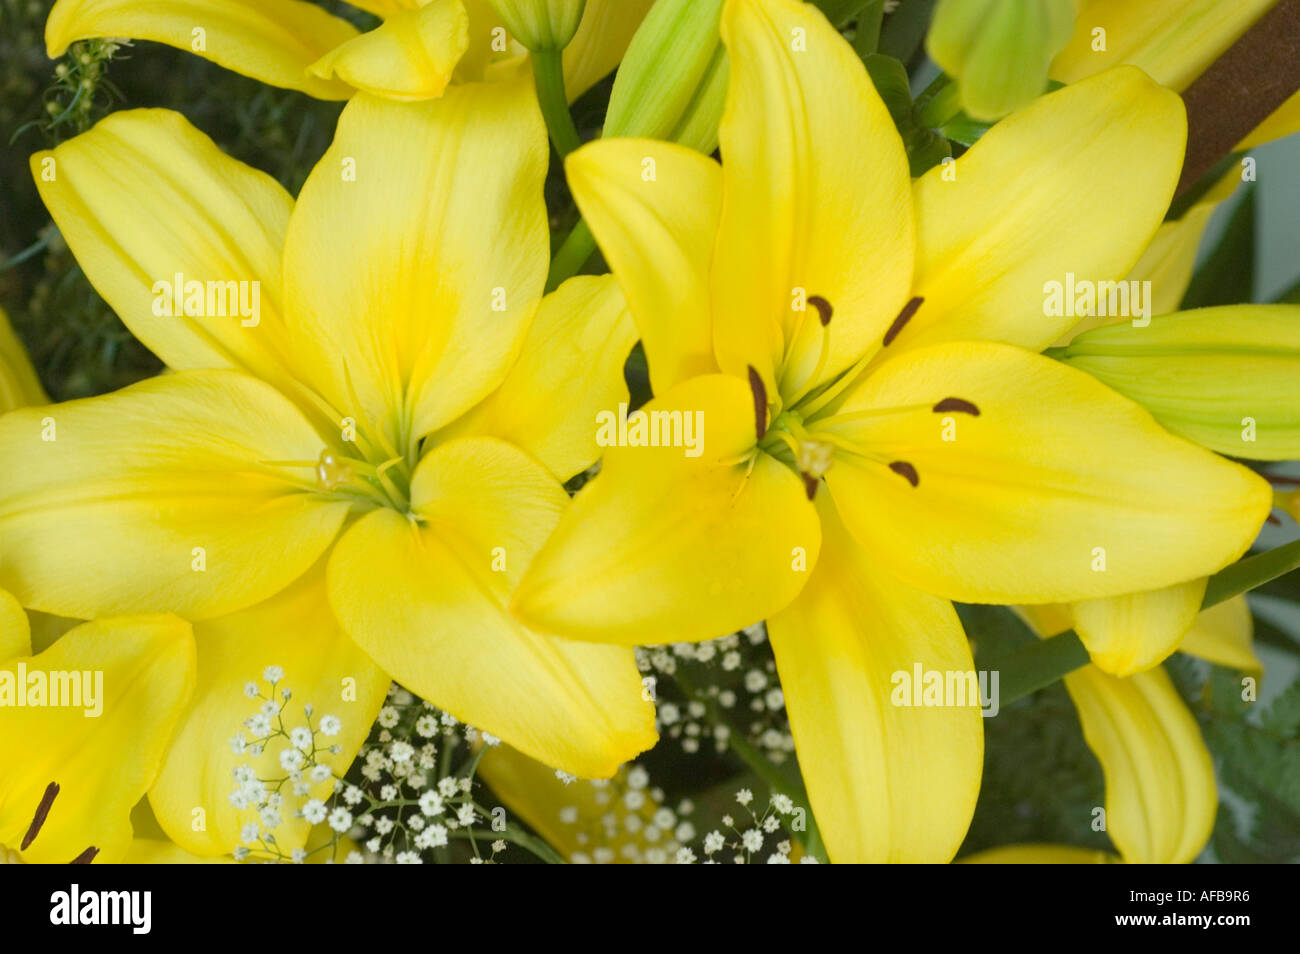 Flower arrangement of yellow daylily or day lily Pavia lilaceae lilium ...